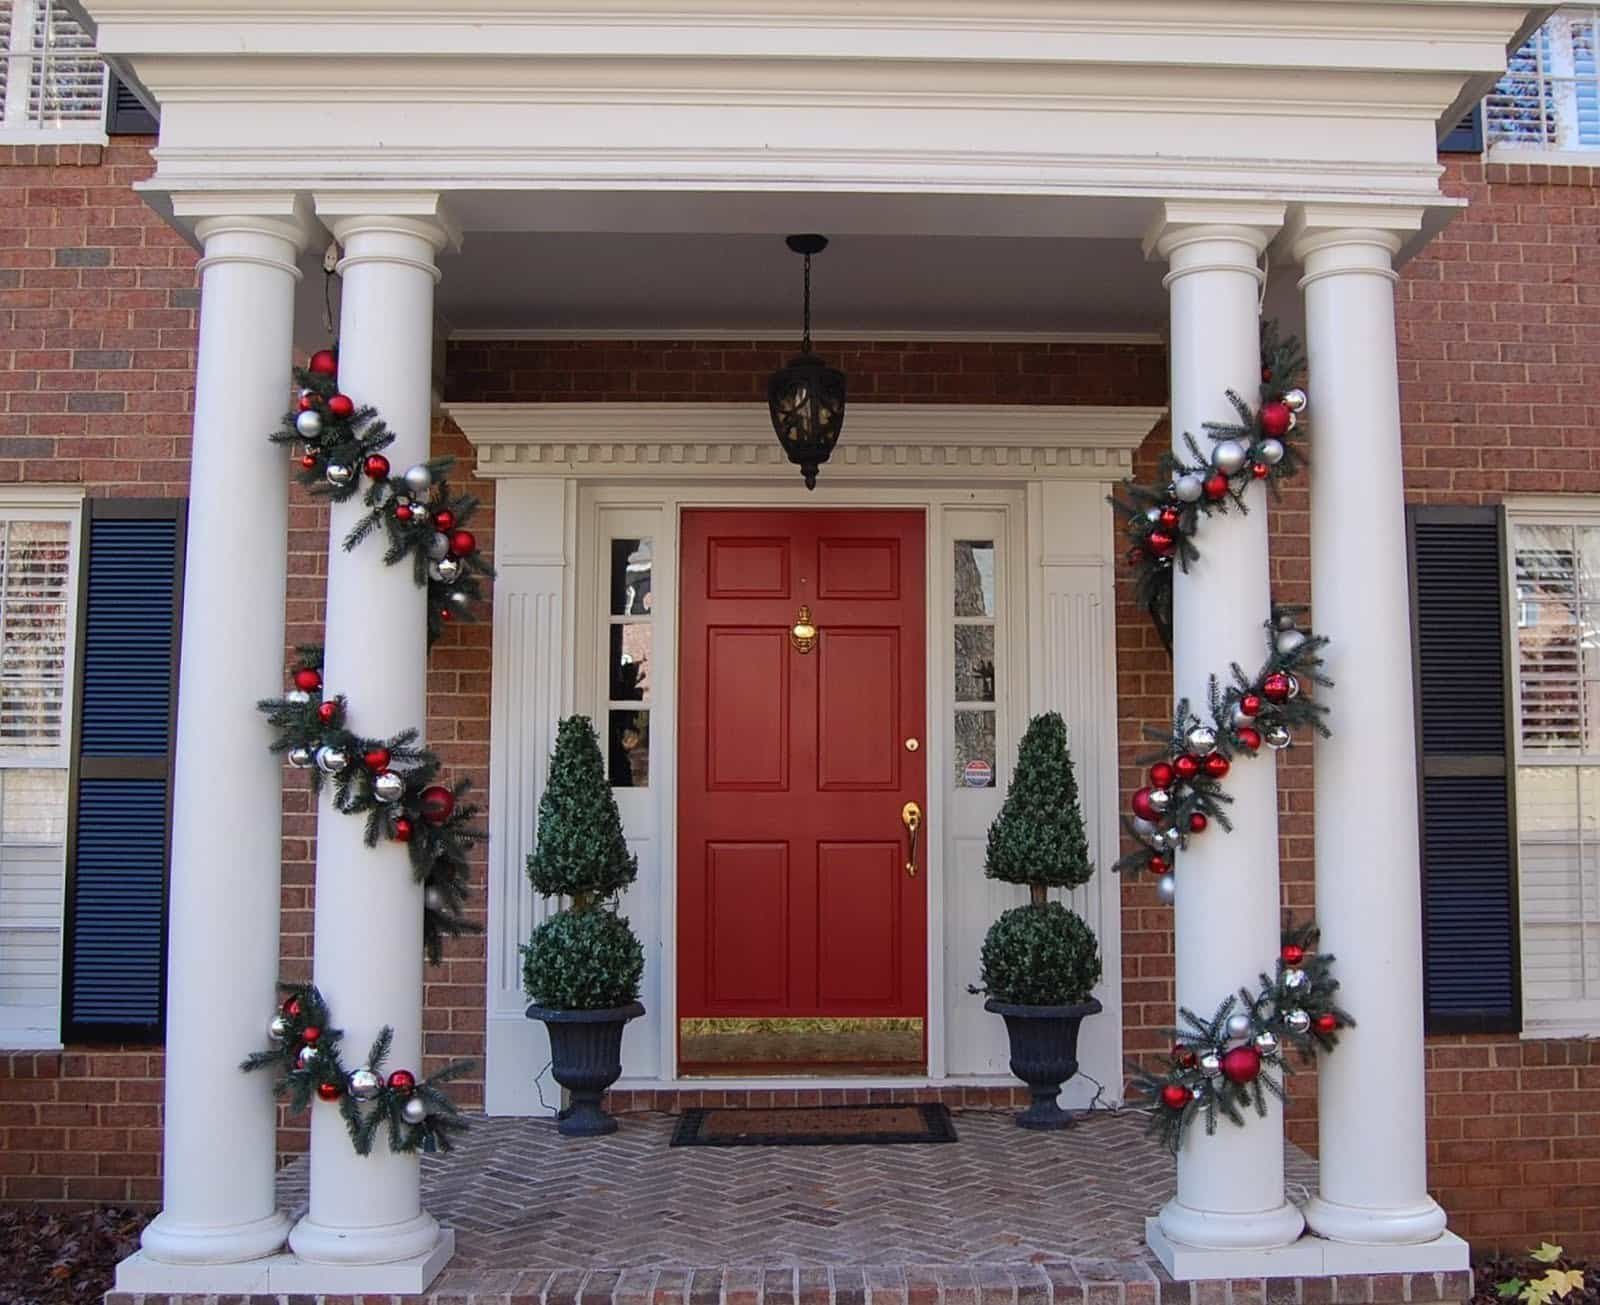 Decorating Front Porch For Christmas
 Christmas Decorating Ideas for Your Porch